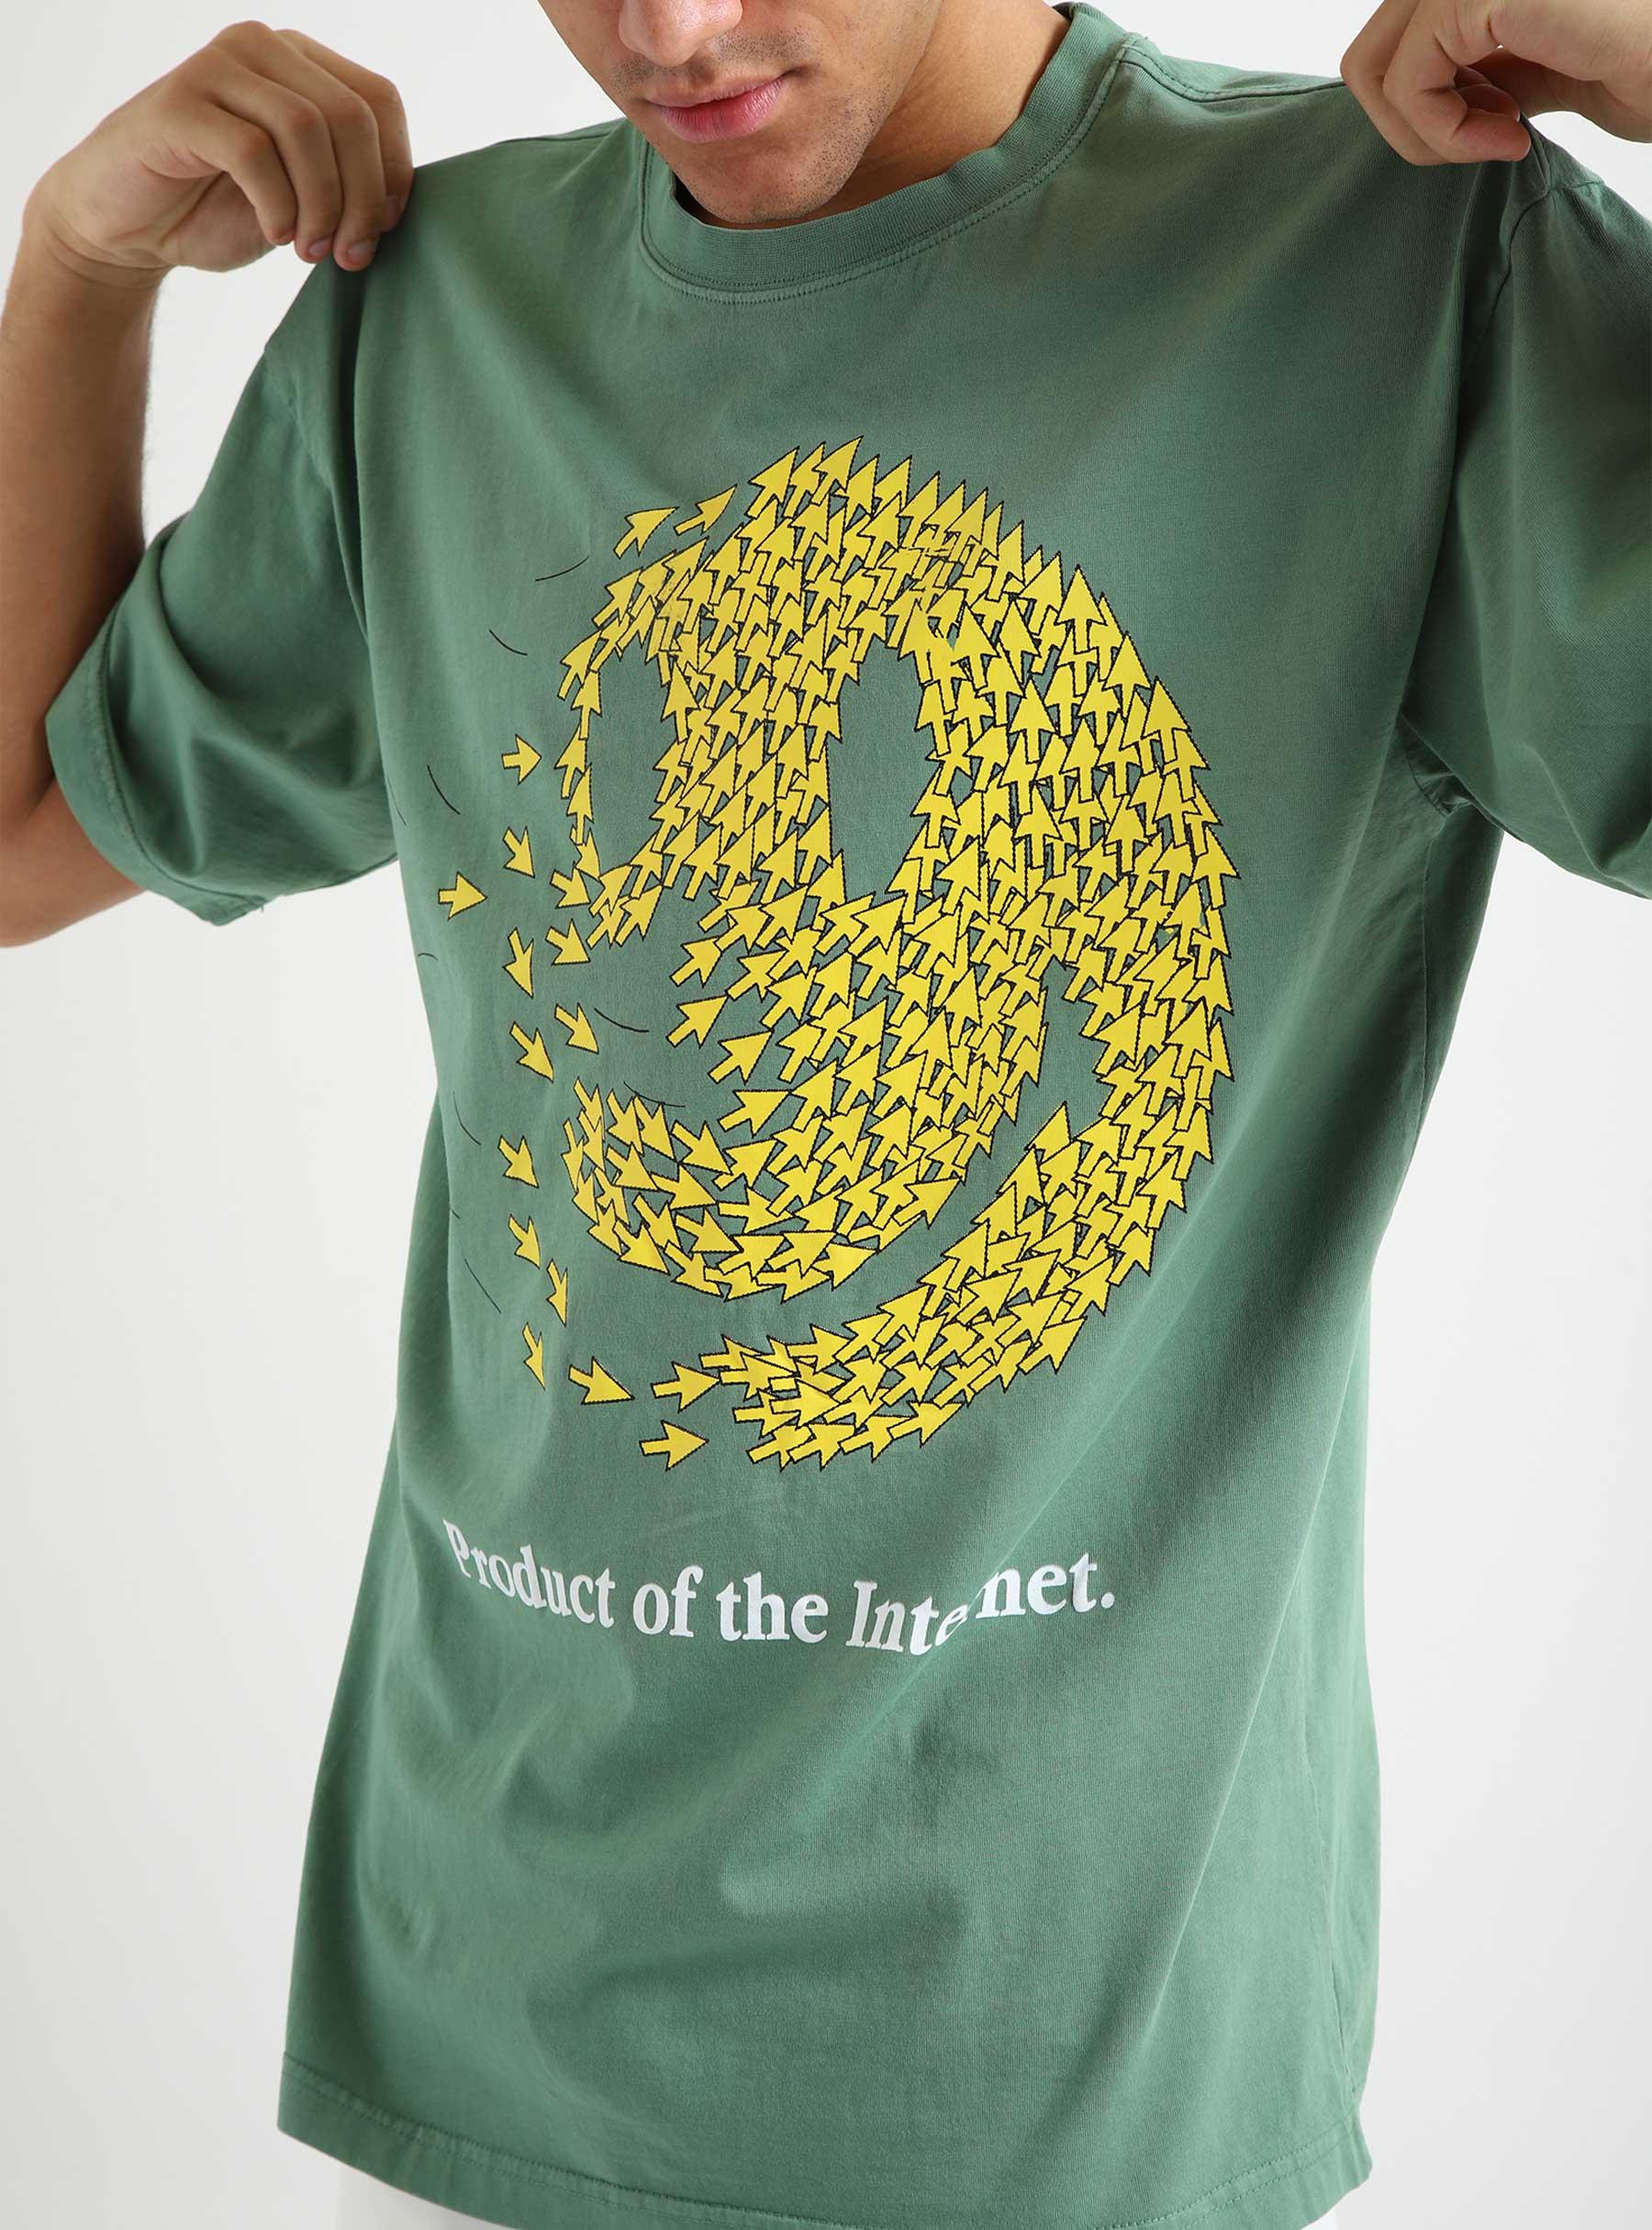 Smiley Product Of The Internet T-Shirt Sage 399001361-1059